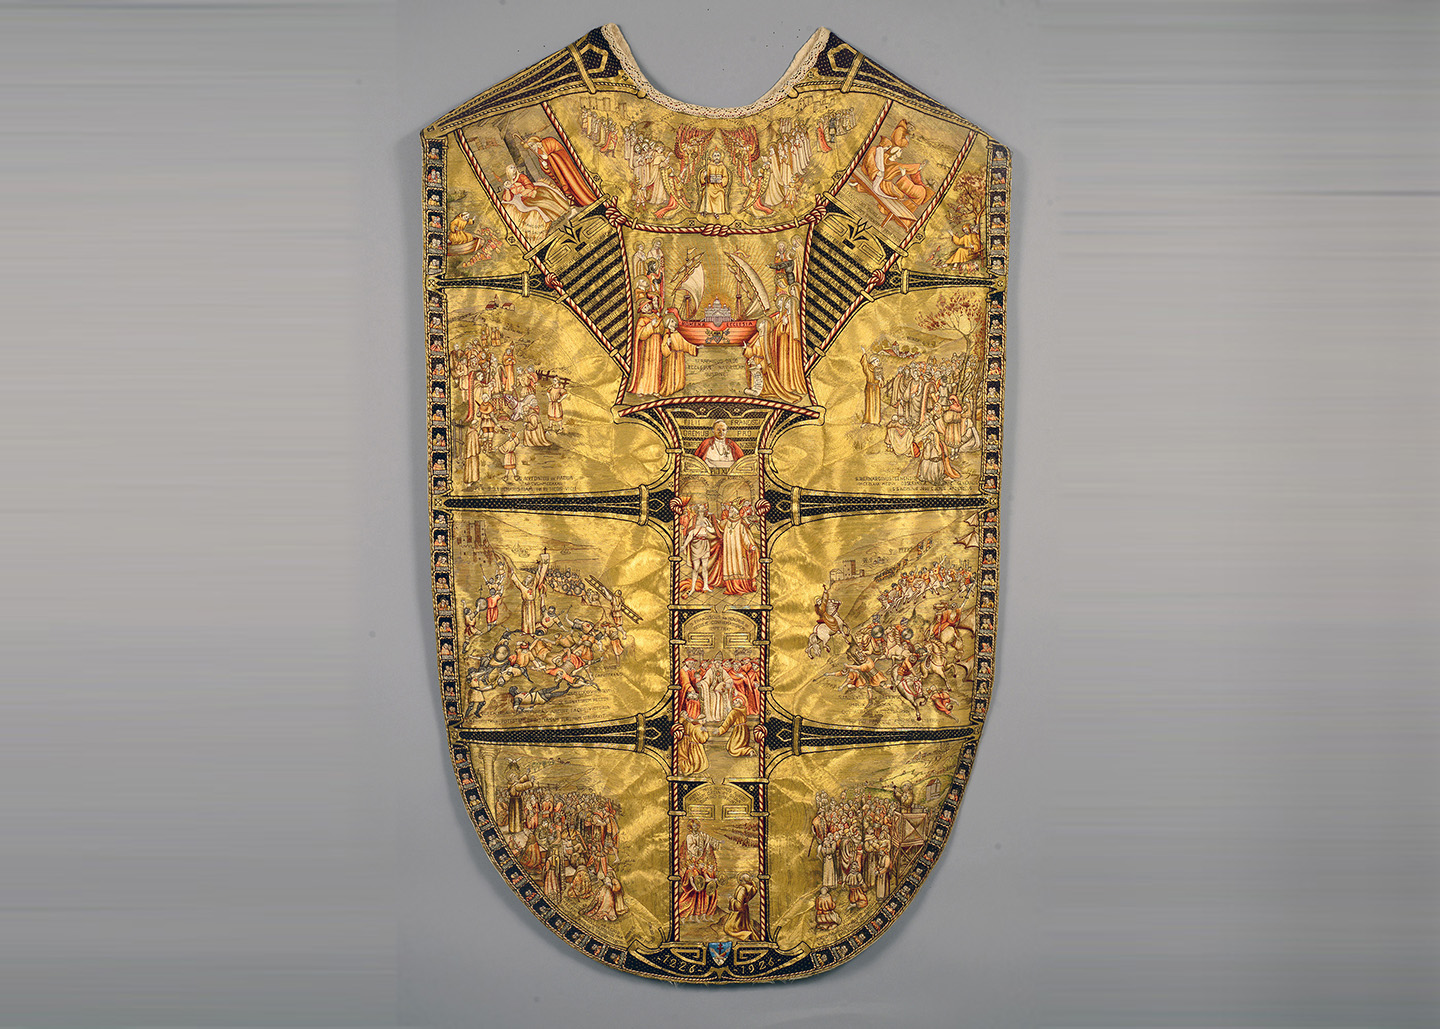 Aureate chasuble with stole and maniple of Pope Pius XI (r. 1922-1939)